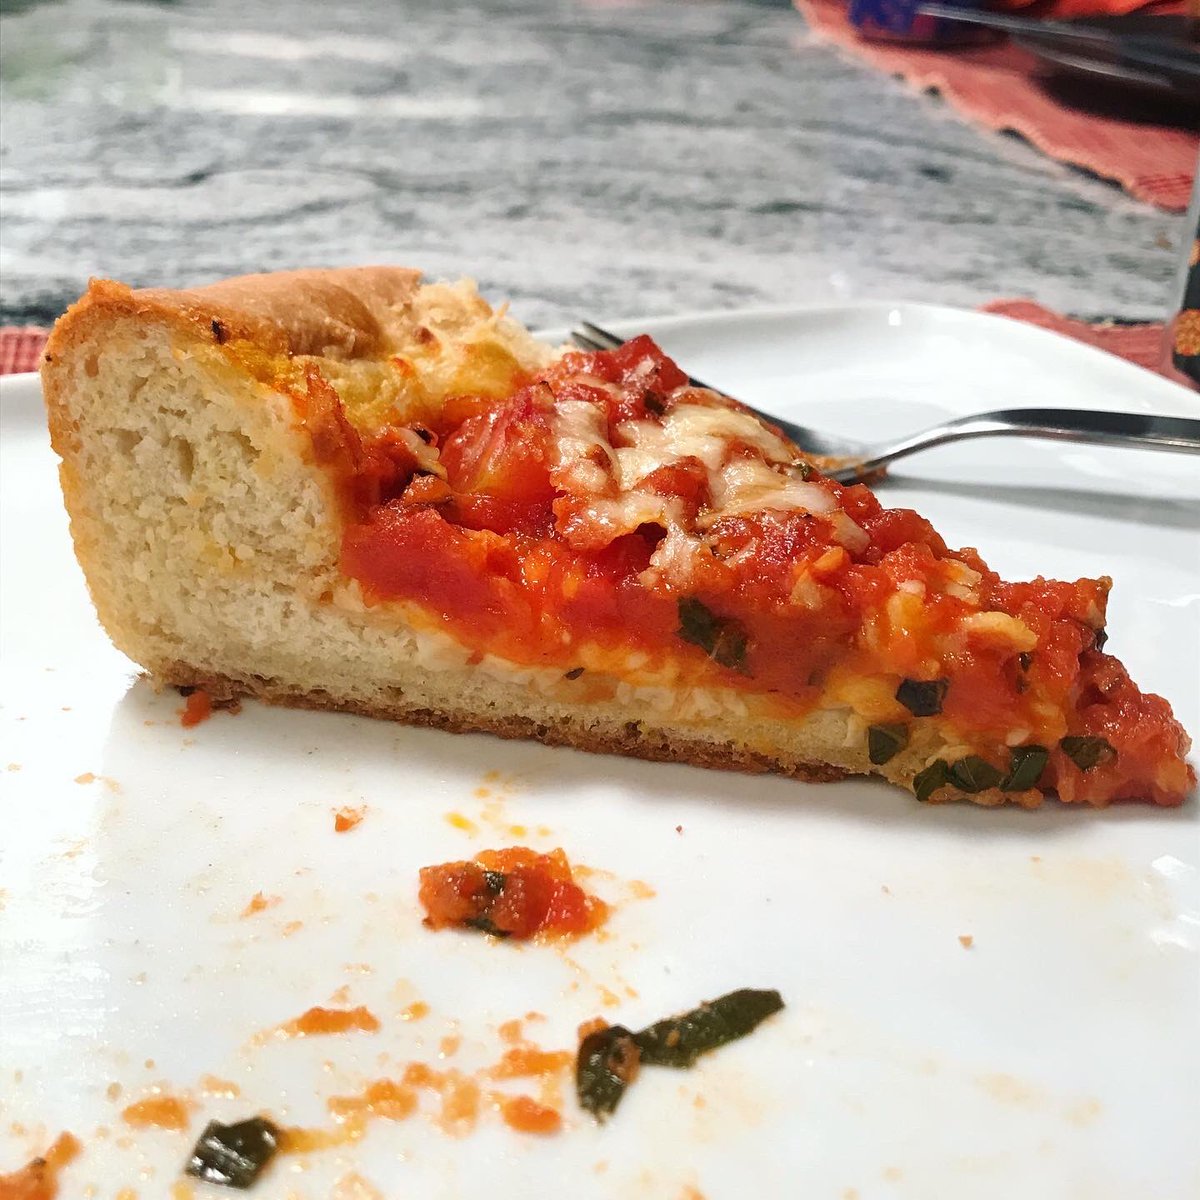 Bread #38: Deep-Dish Pizza. So, despite having defended deep dish on here, it’s actually not my favorite thing so I wasn’t geeked to make this. But making it actually helped me learn some things about deep dish that made me proud of it and more appreciative.